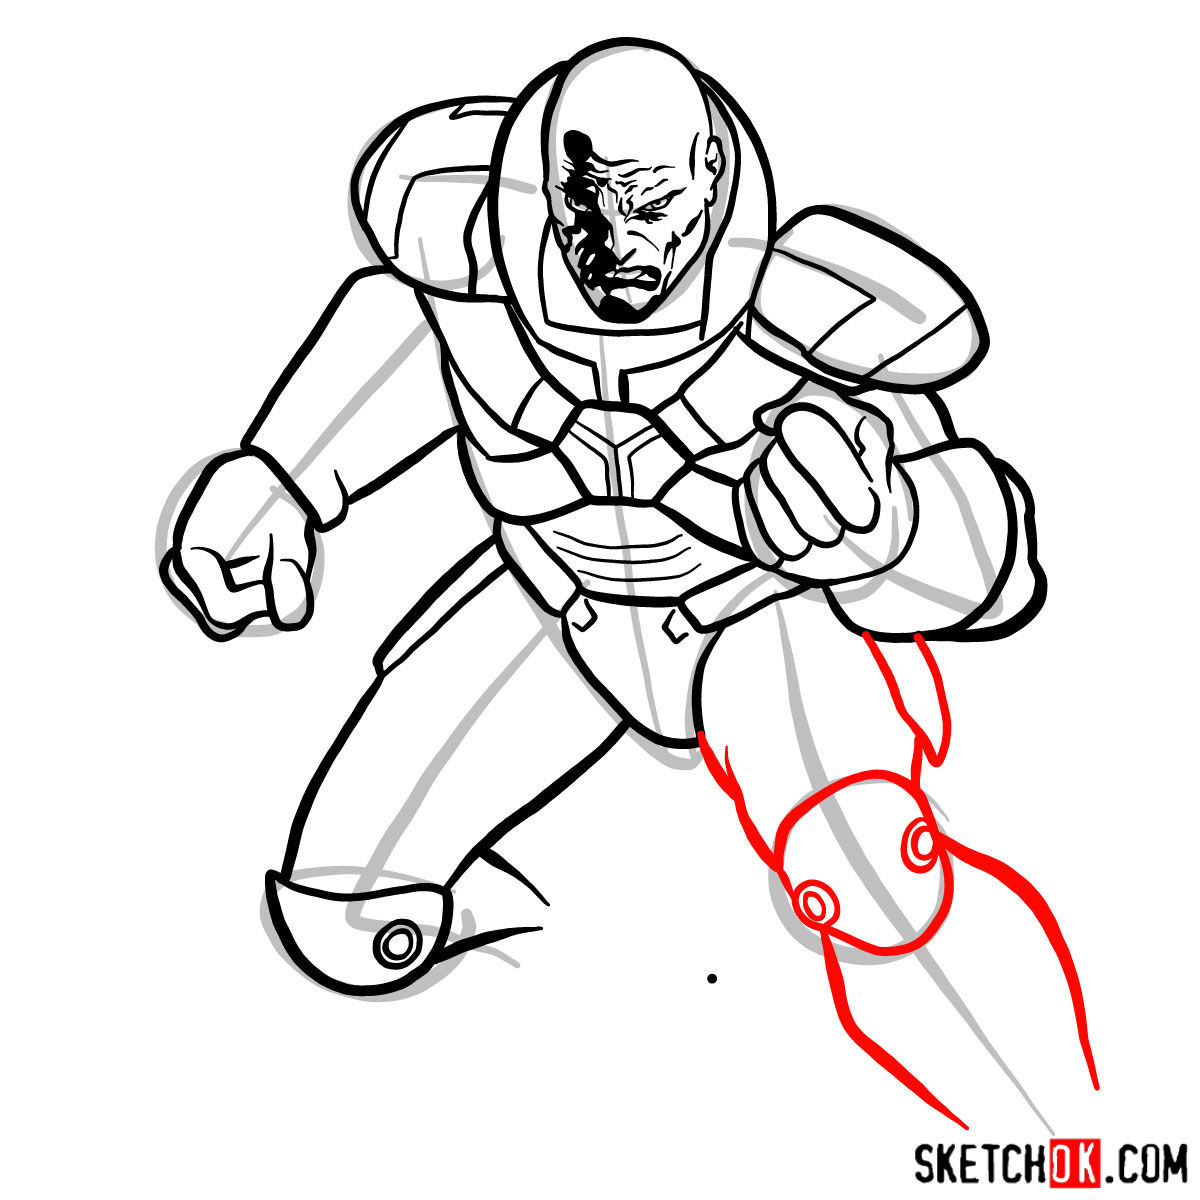 How to draw Lex Luthor - Sketchok easy drawing guides